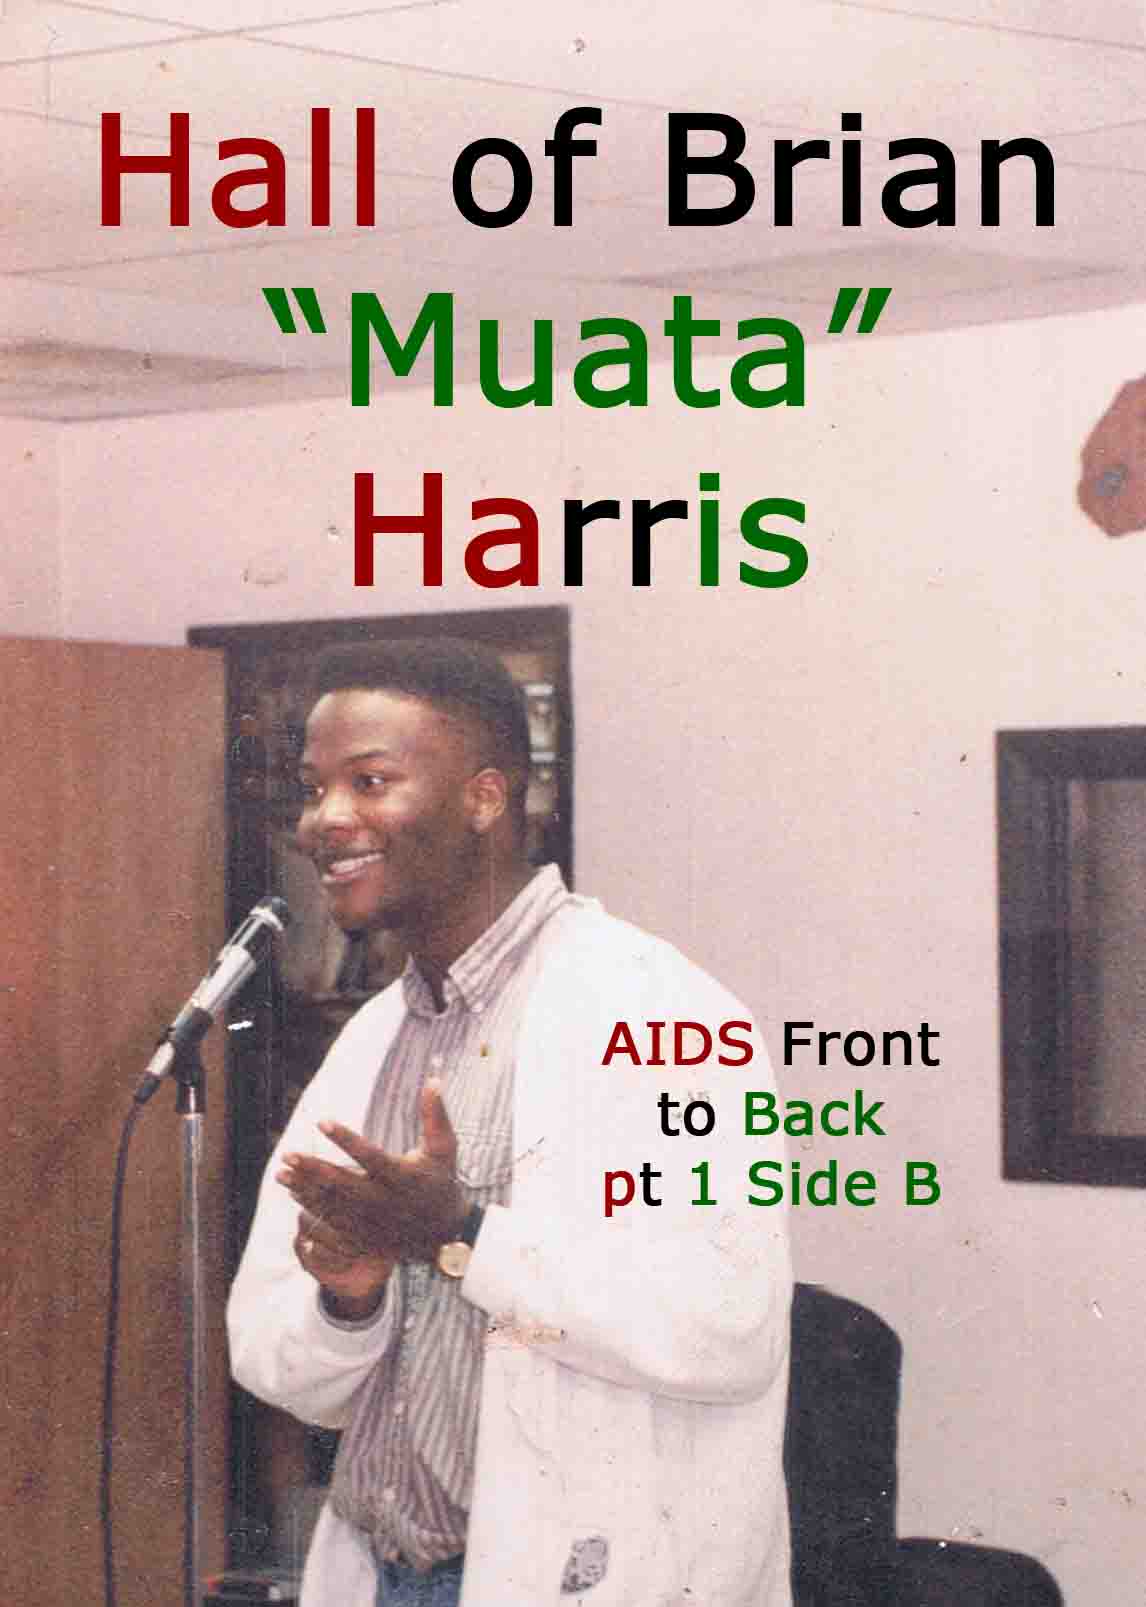 AIDS front to back pt 1 side B